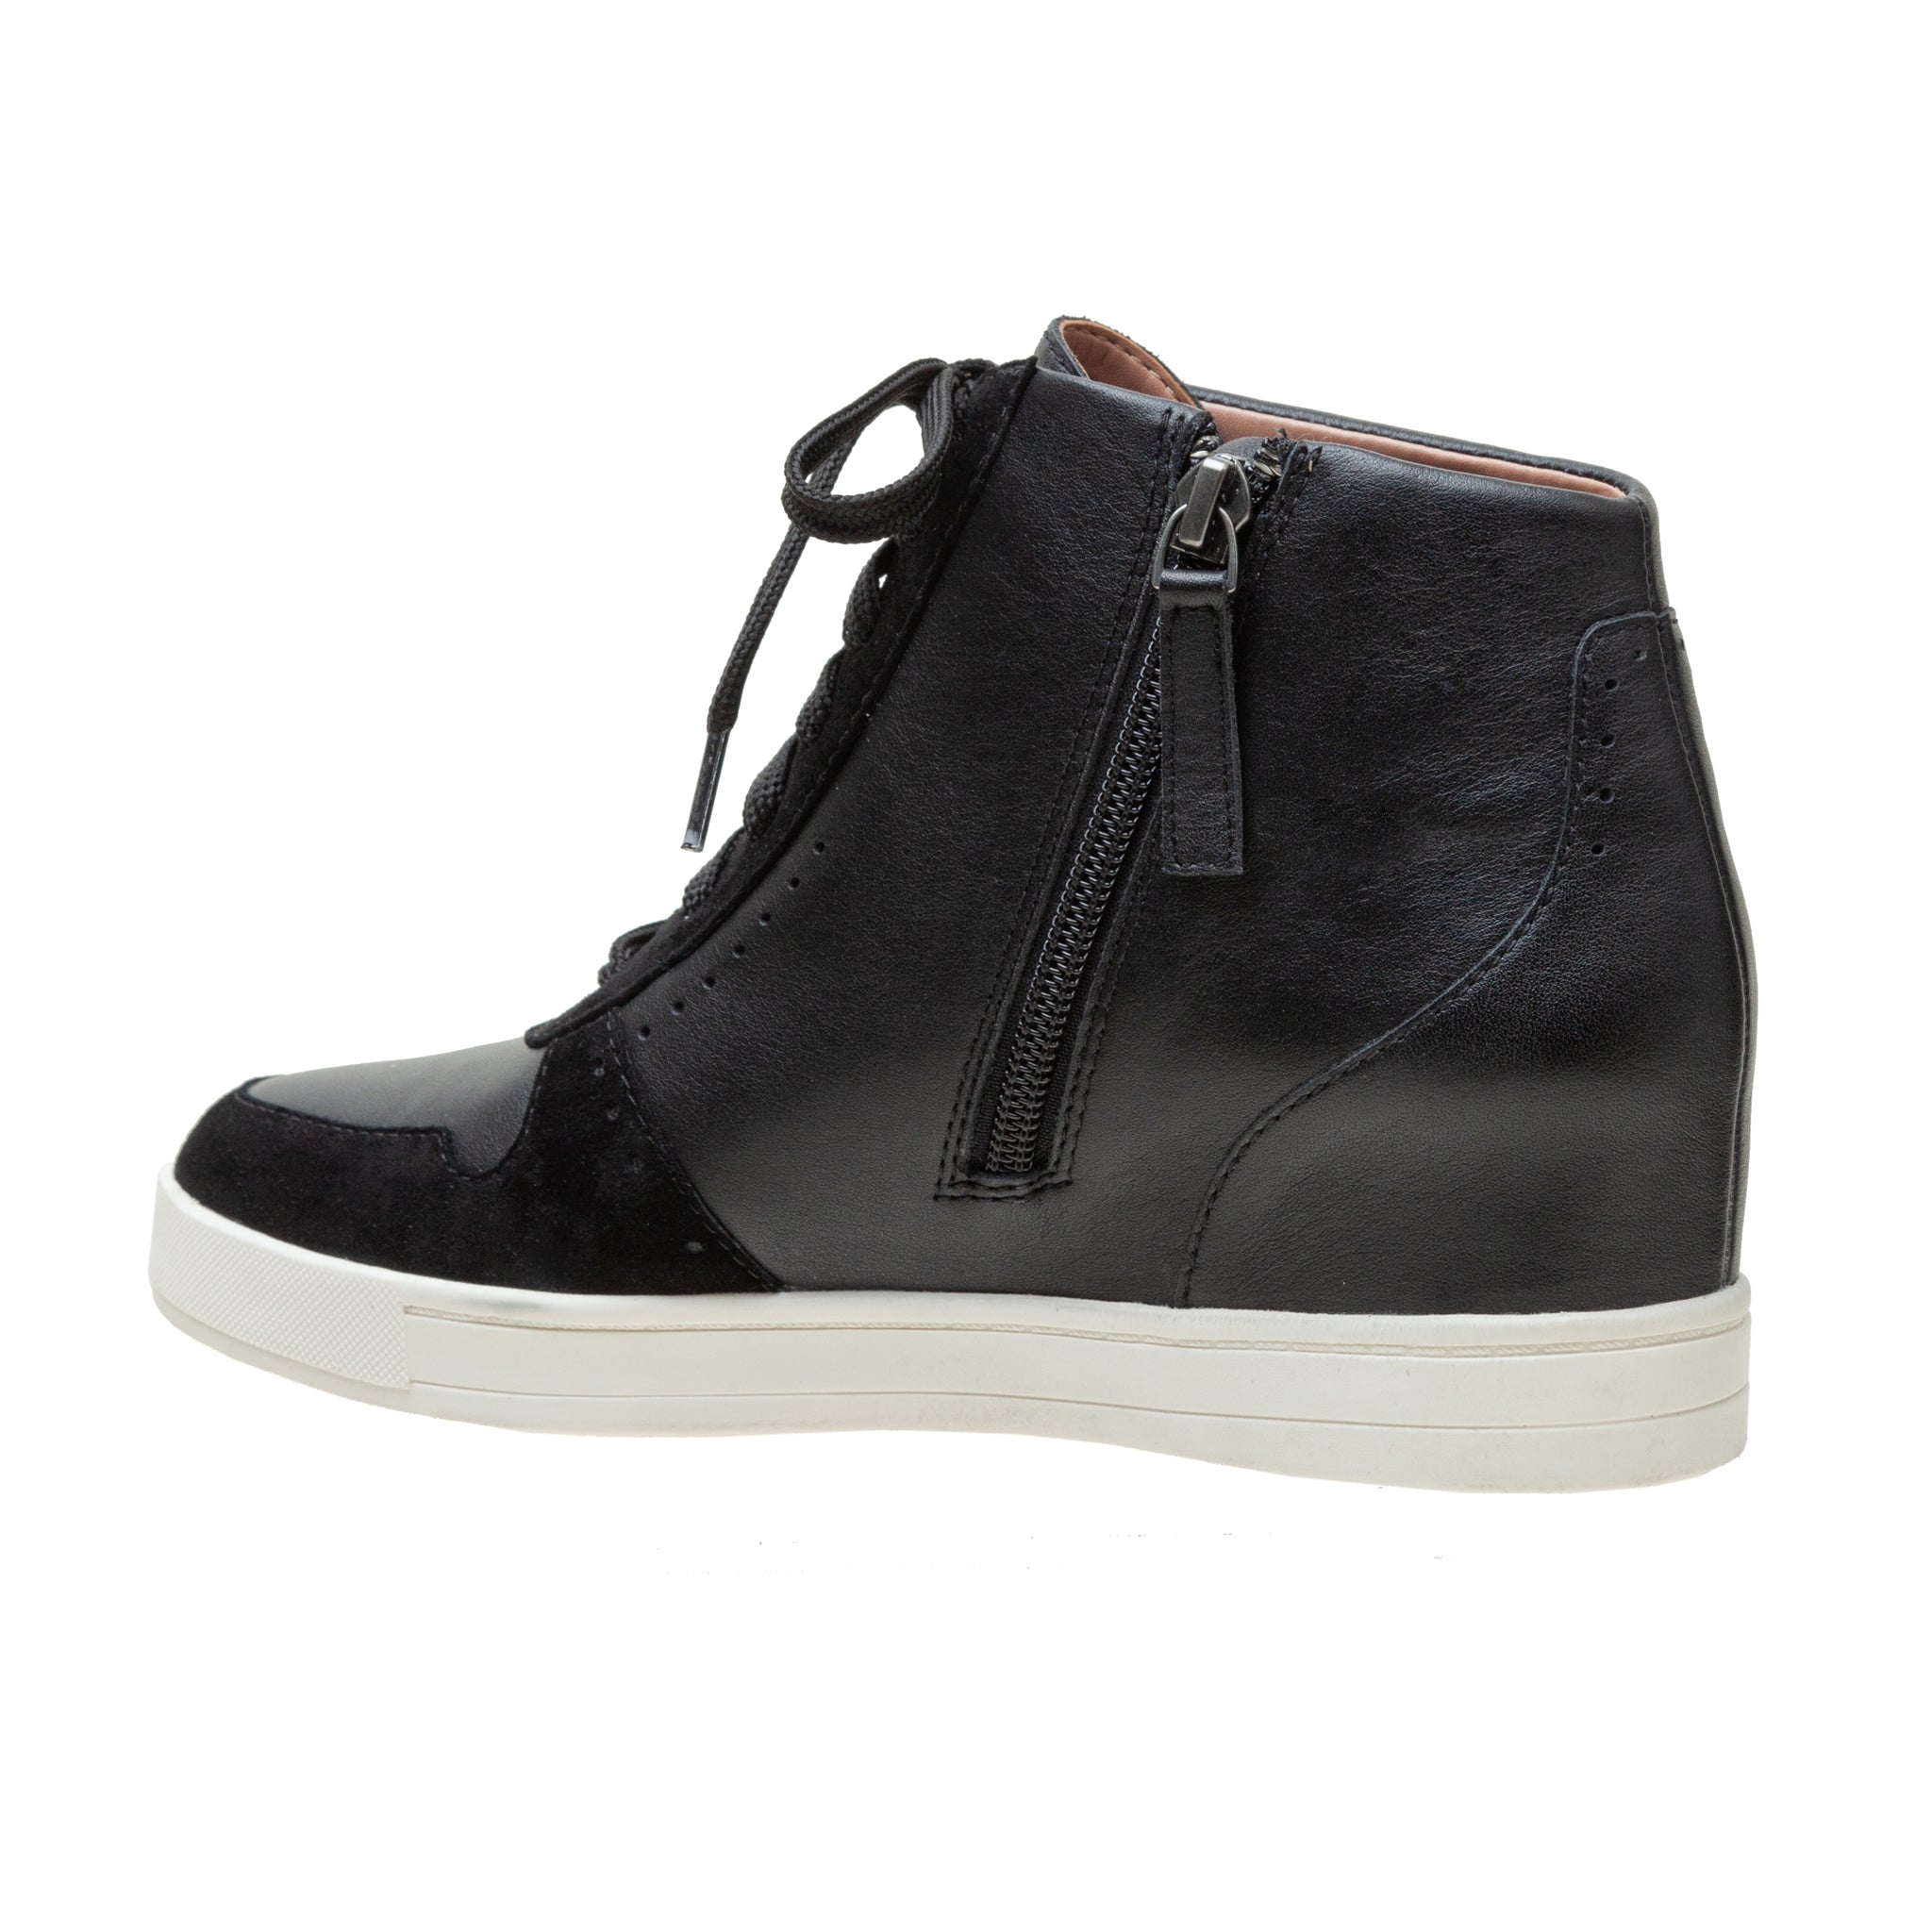 Guess Womens Shoes Hevin Quilted Wedge Sneakers in Black | Lyst